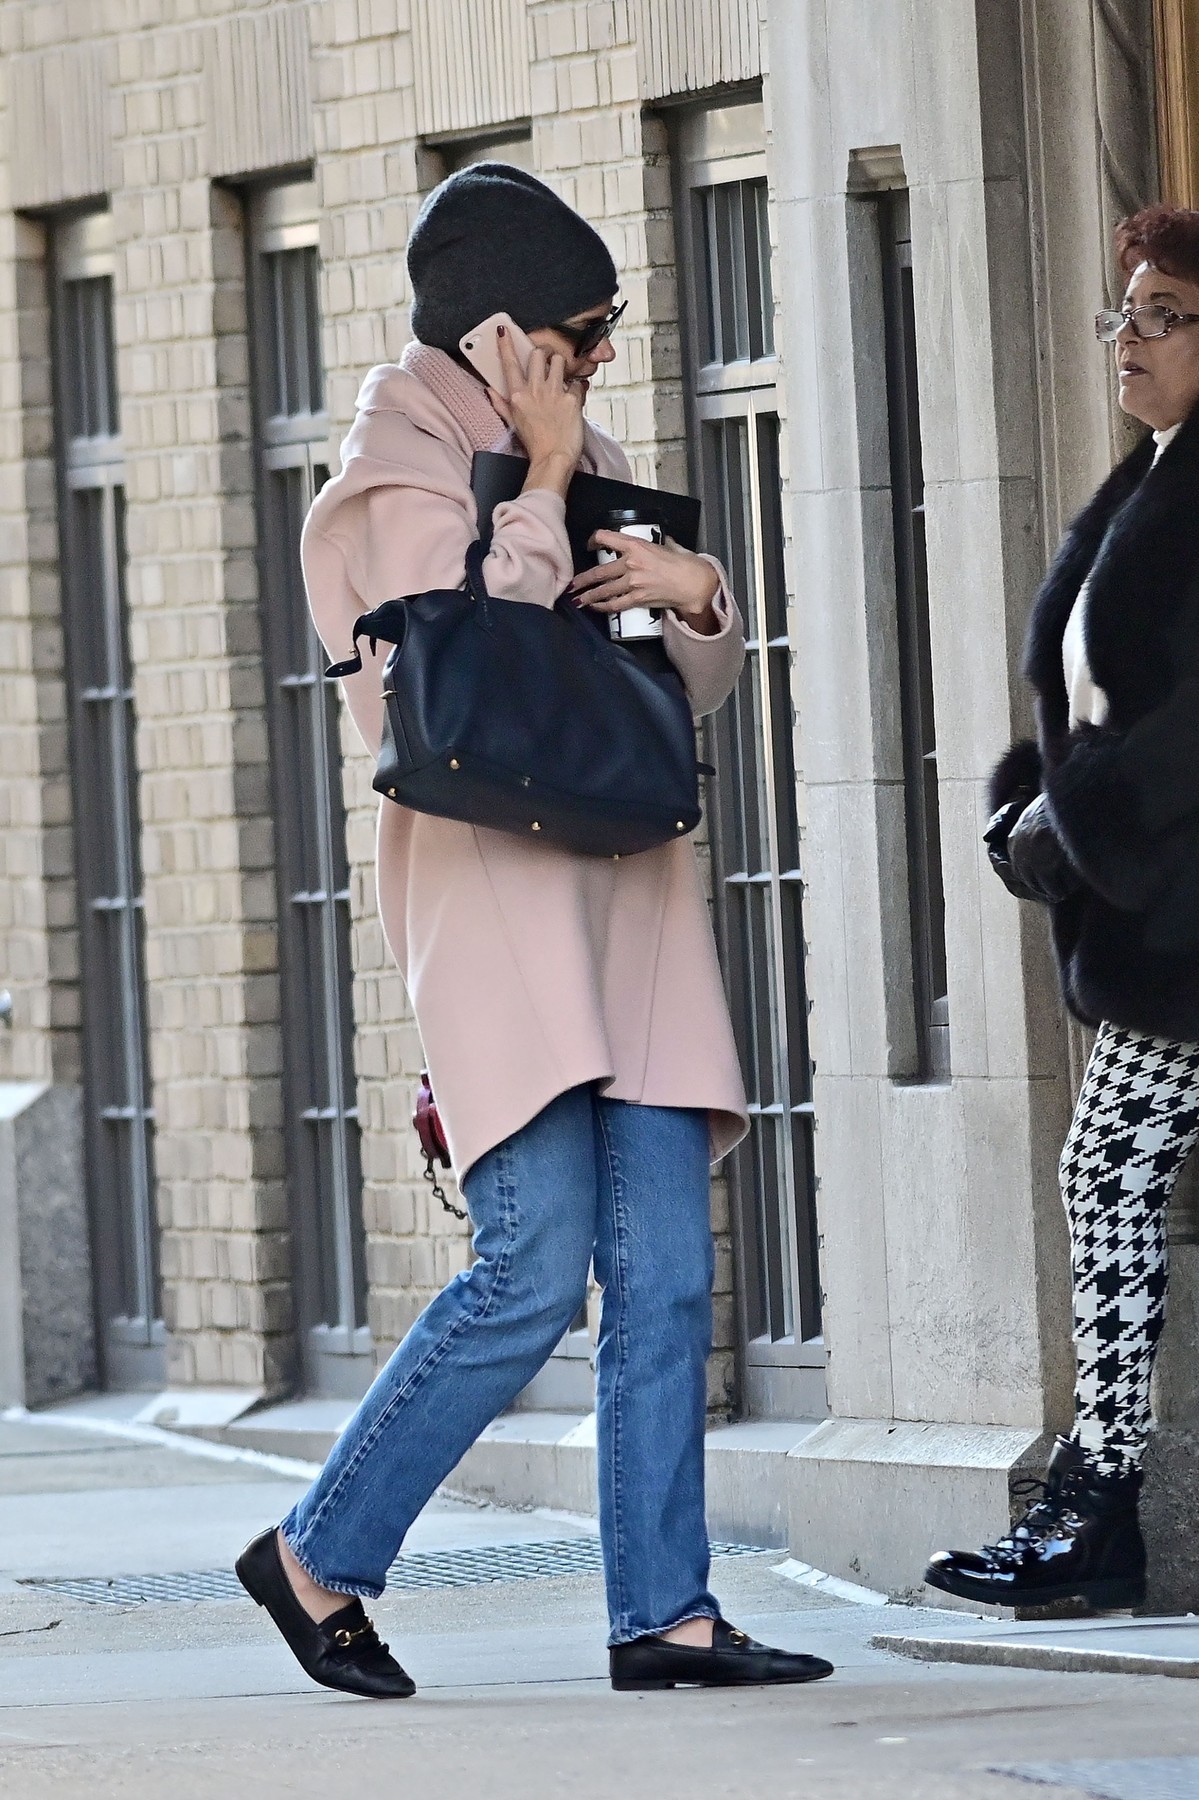 New York, Ny  - Katie Holmes almost spill her coffee while she picks up a phone call arriving home from castings

BACKGRID USA 28 JANUARY 2020, Image: 495316713, License: Rights-managed, Restrictions: , Model Release: no, Credit line: Skyler2018 / BACKGRID / Backgrid USA / Profimedia